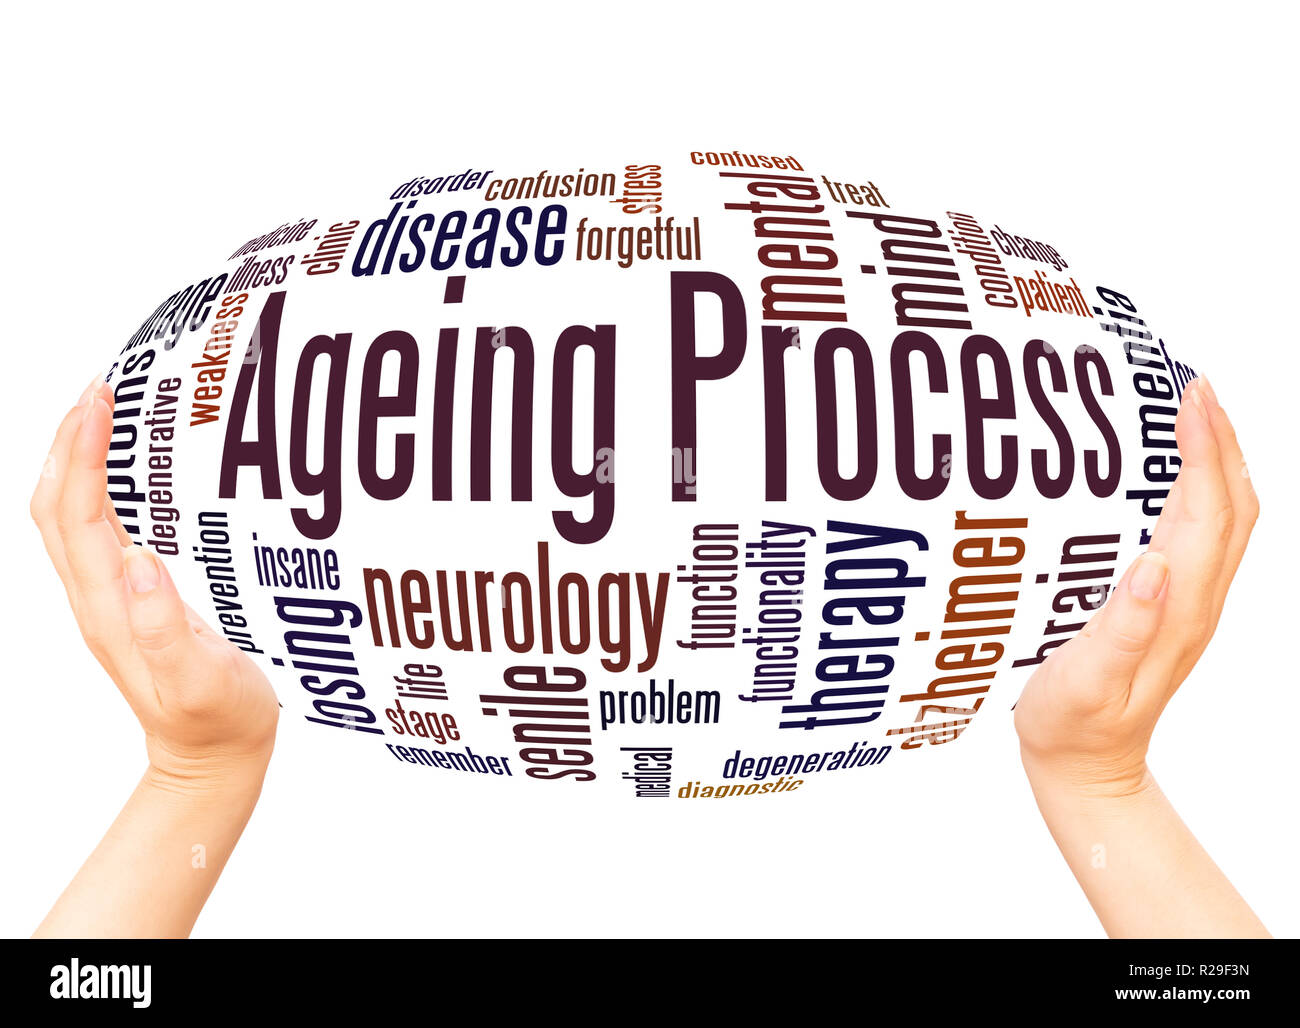 Ageing Process word cloud hand sphere concept on white background. Stock Photo